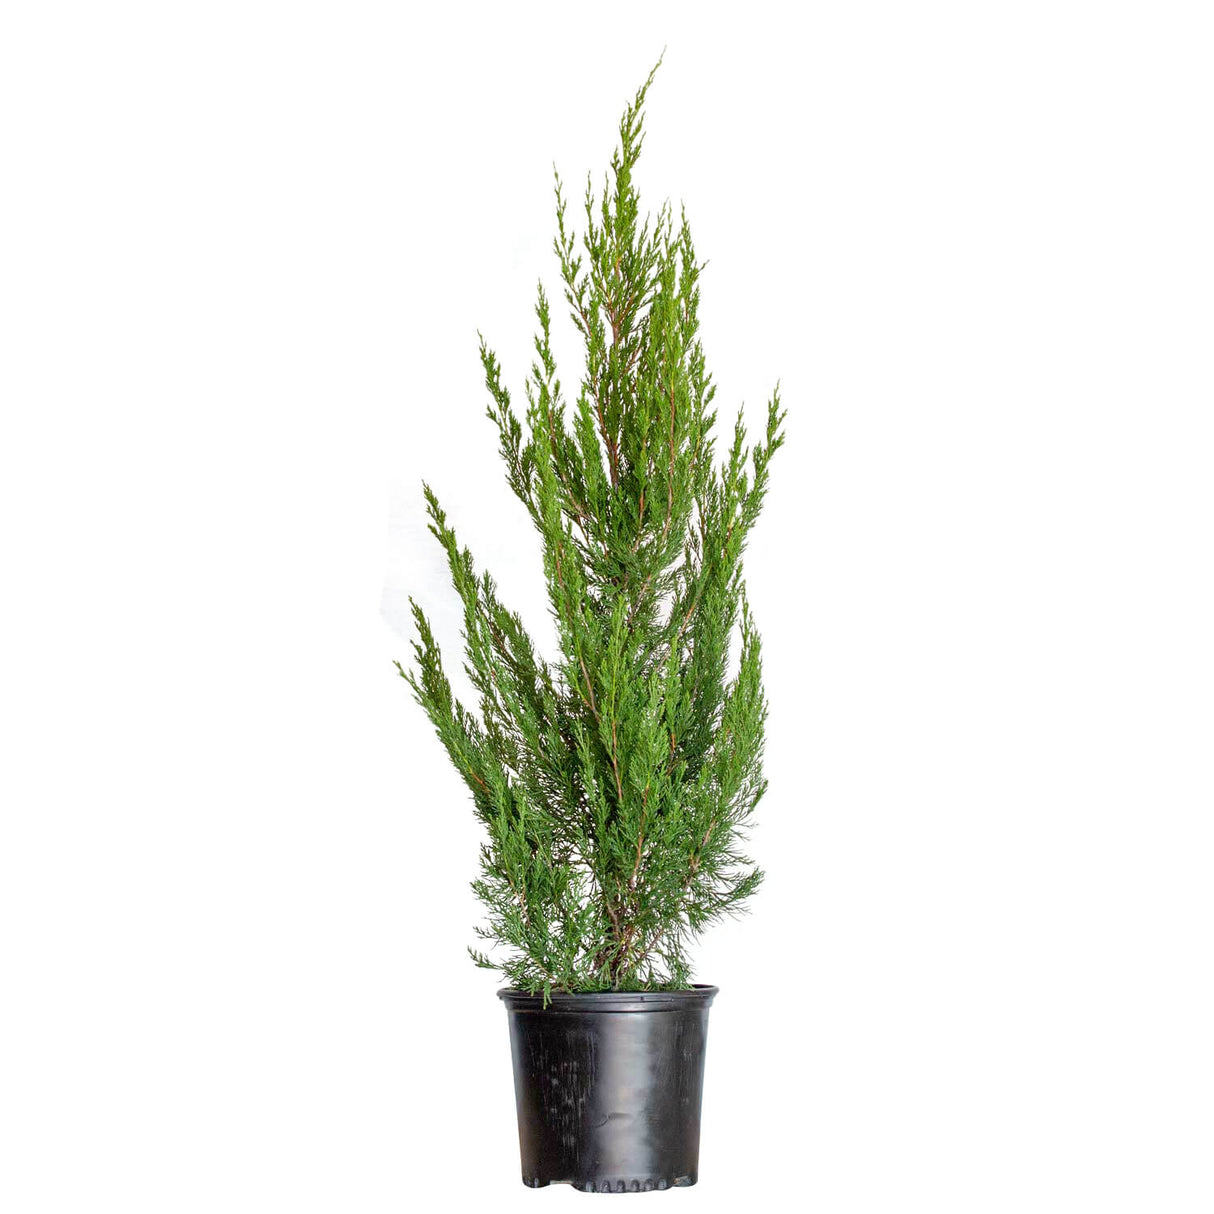 Spartan Juniper | Shop Online with PlantsbyMail.com – Plants by Mail